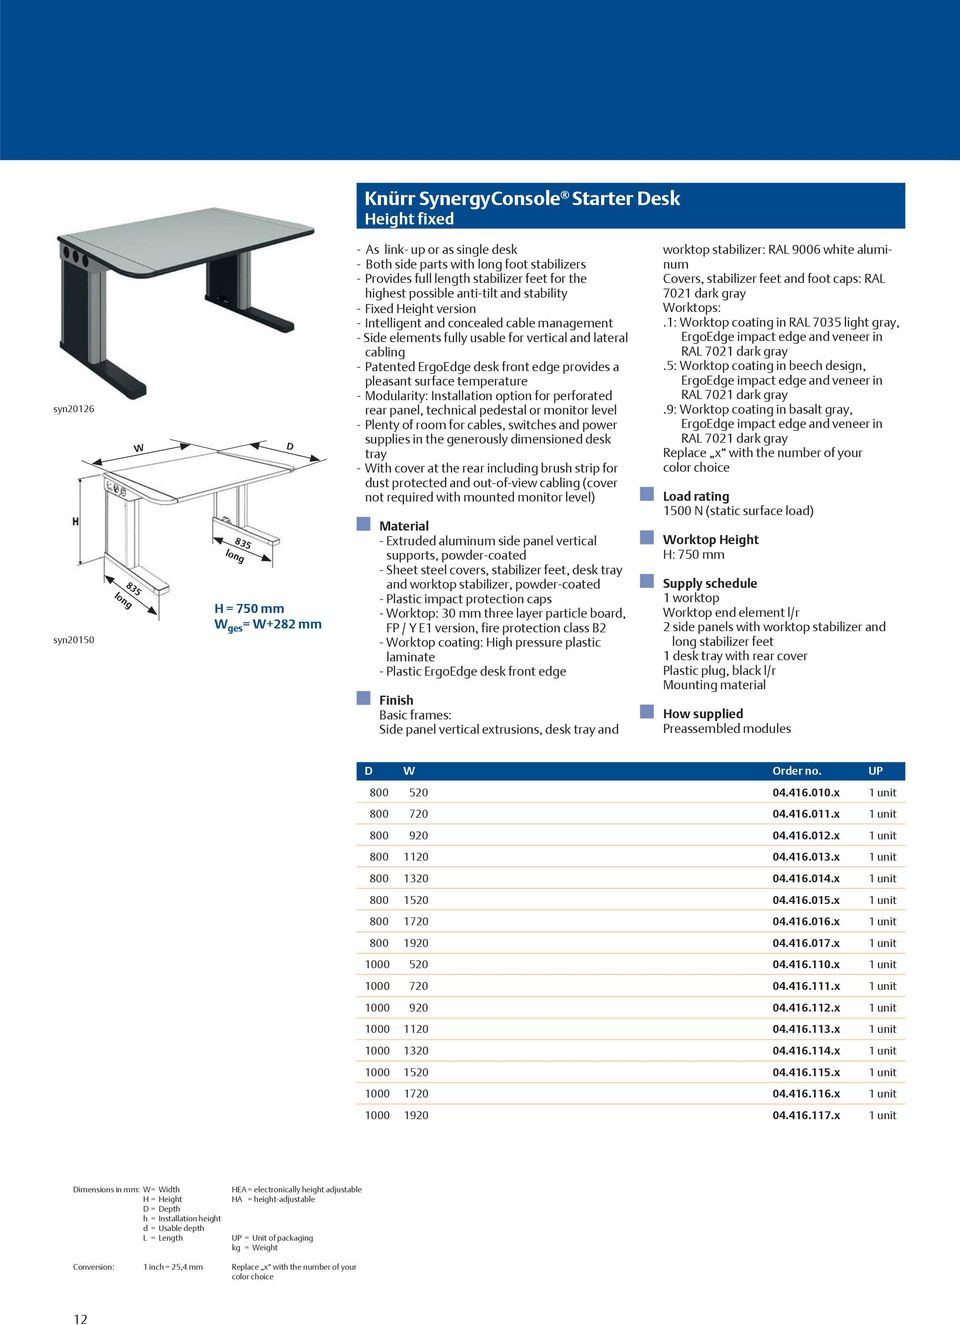 lateral cabling - Patented ErgoEdge desk front edge provides a pleasant surface temperature - Modularity: Installation option for perforated rear panel, technical pedestal or monitor level - Plenty